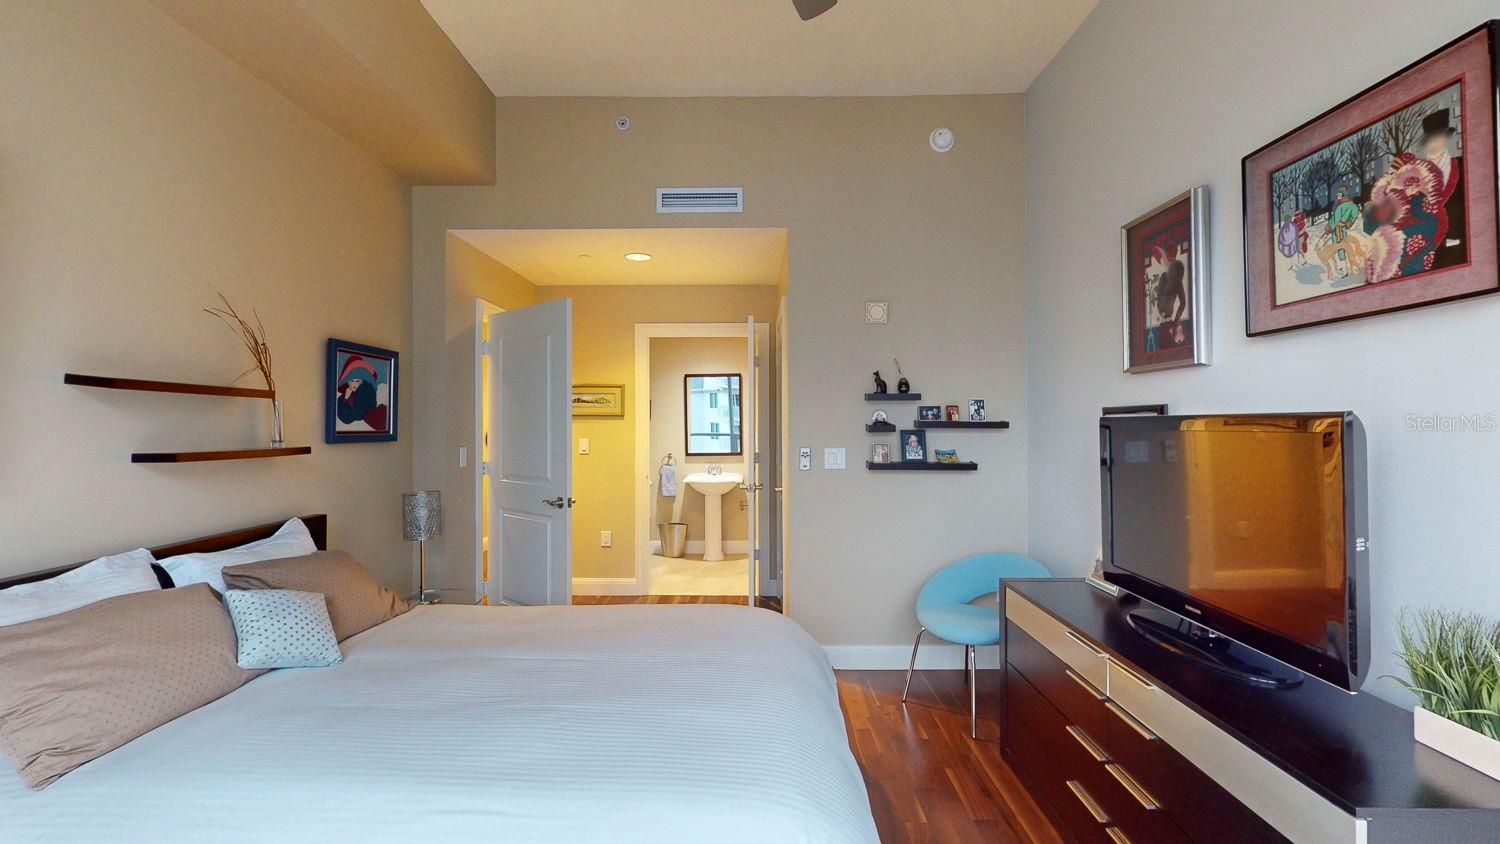 Each secondary bedroom boasts its own en suite bathroom for added convenience and privacy.